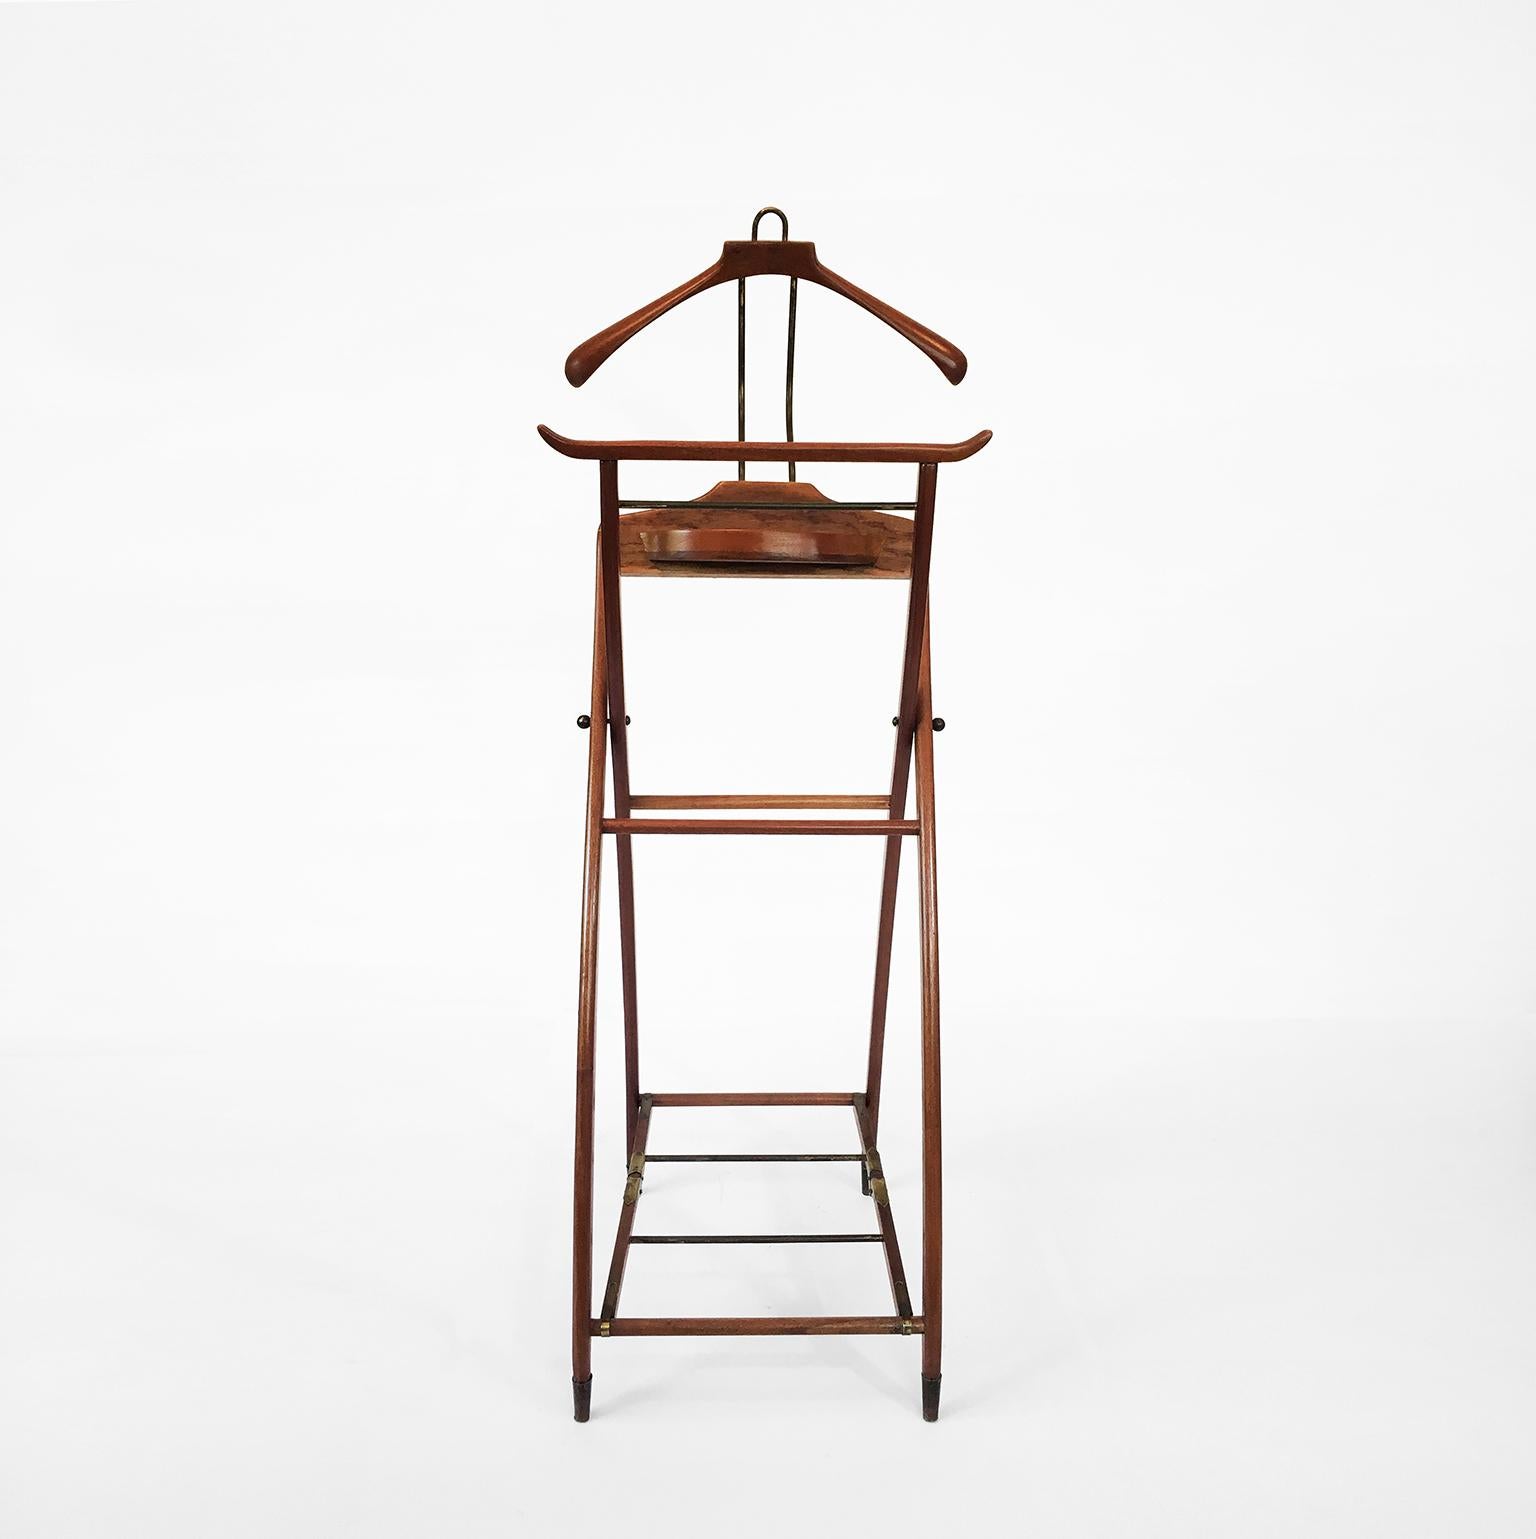 Mexican valet stand, circa 1950, made of mahogany and brass accents.